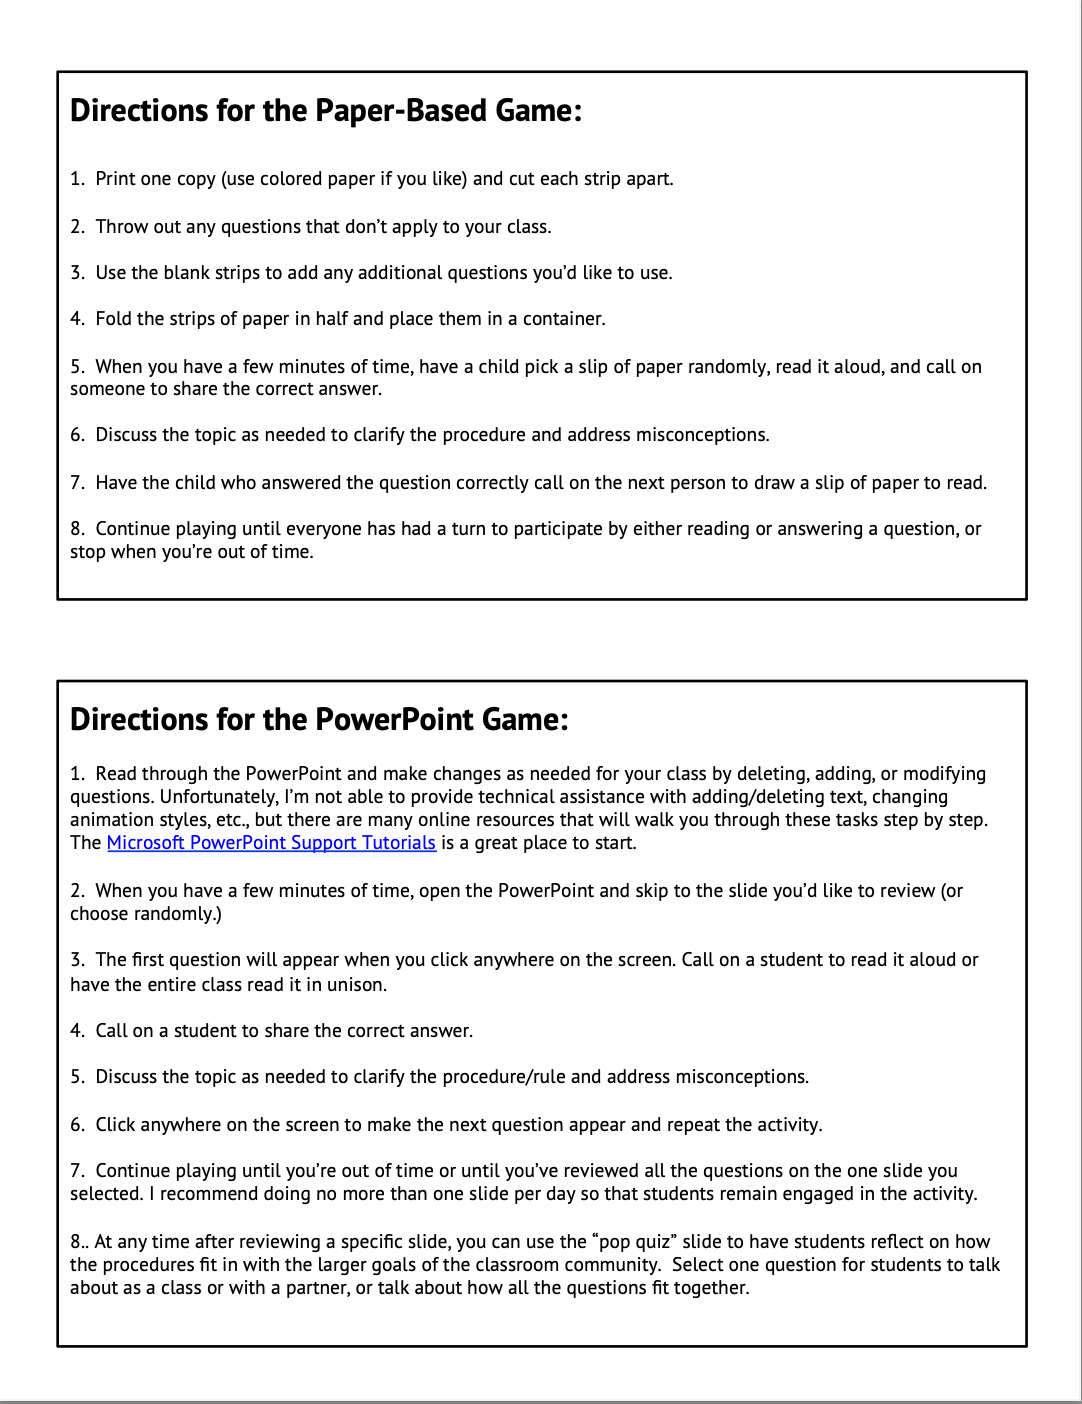 Class Rules Review Games: Fun paper-based & PowerPoint activities!